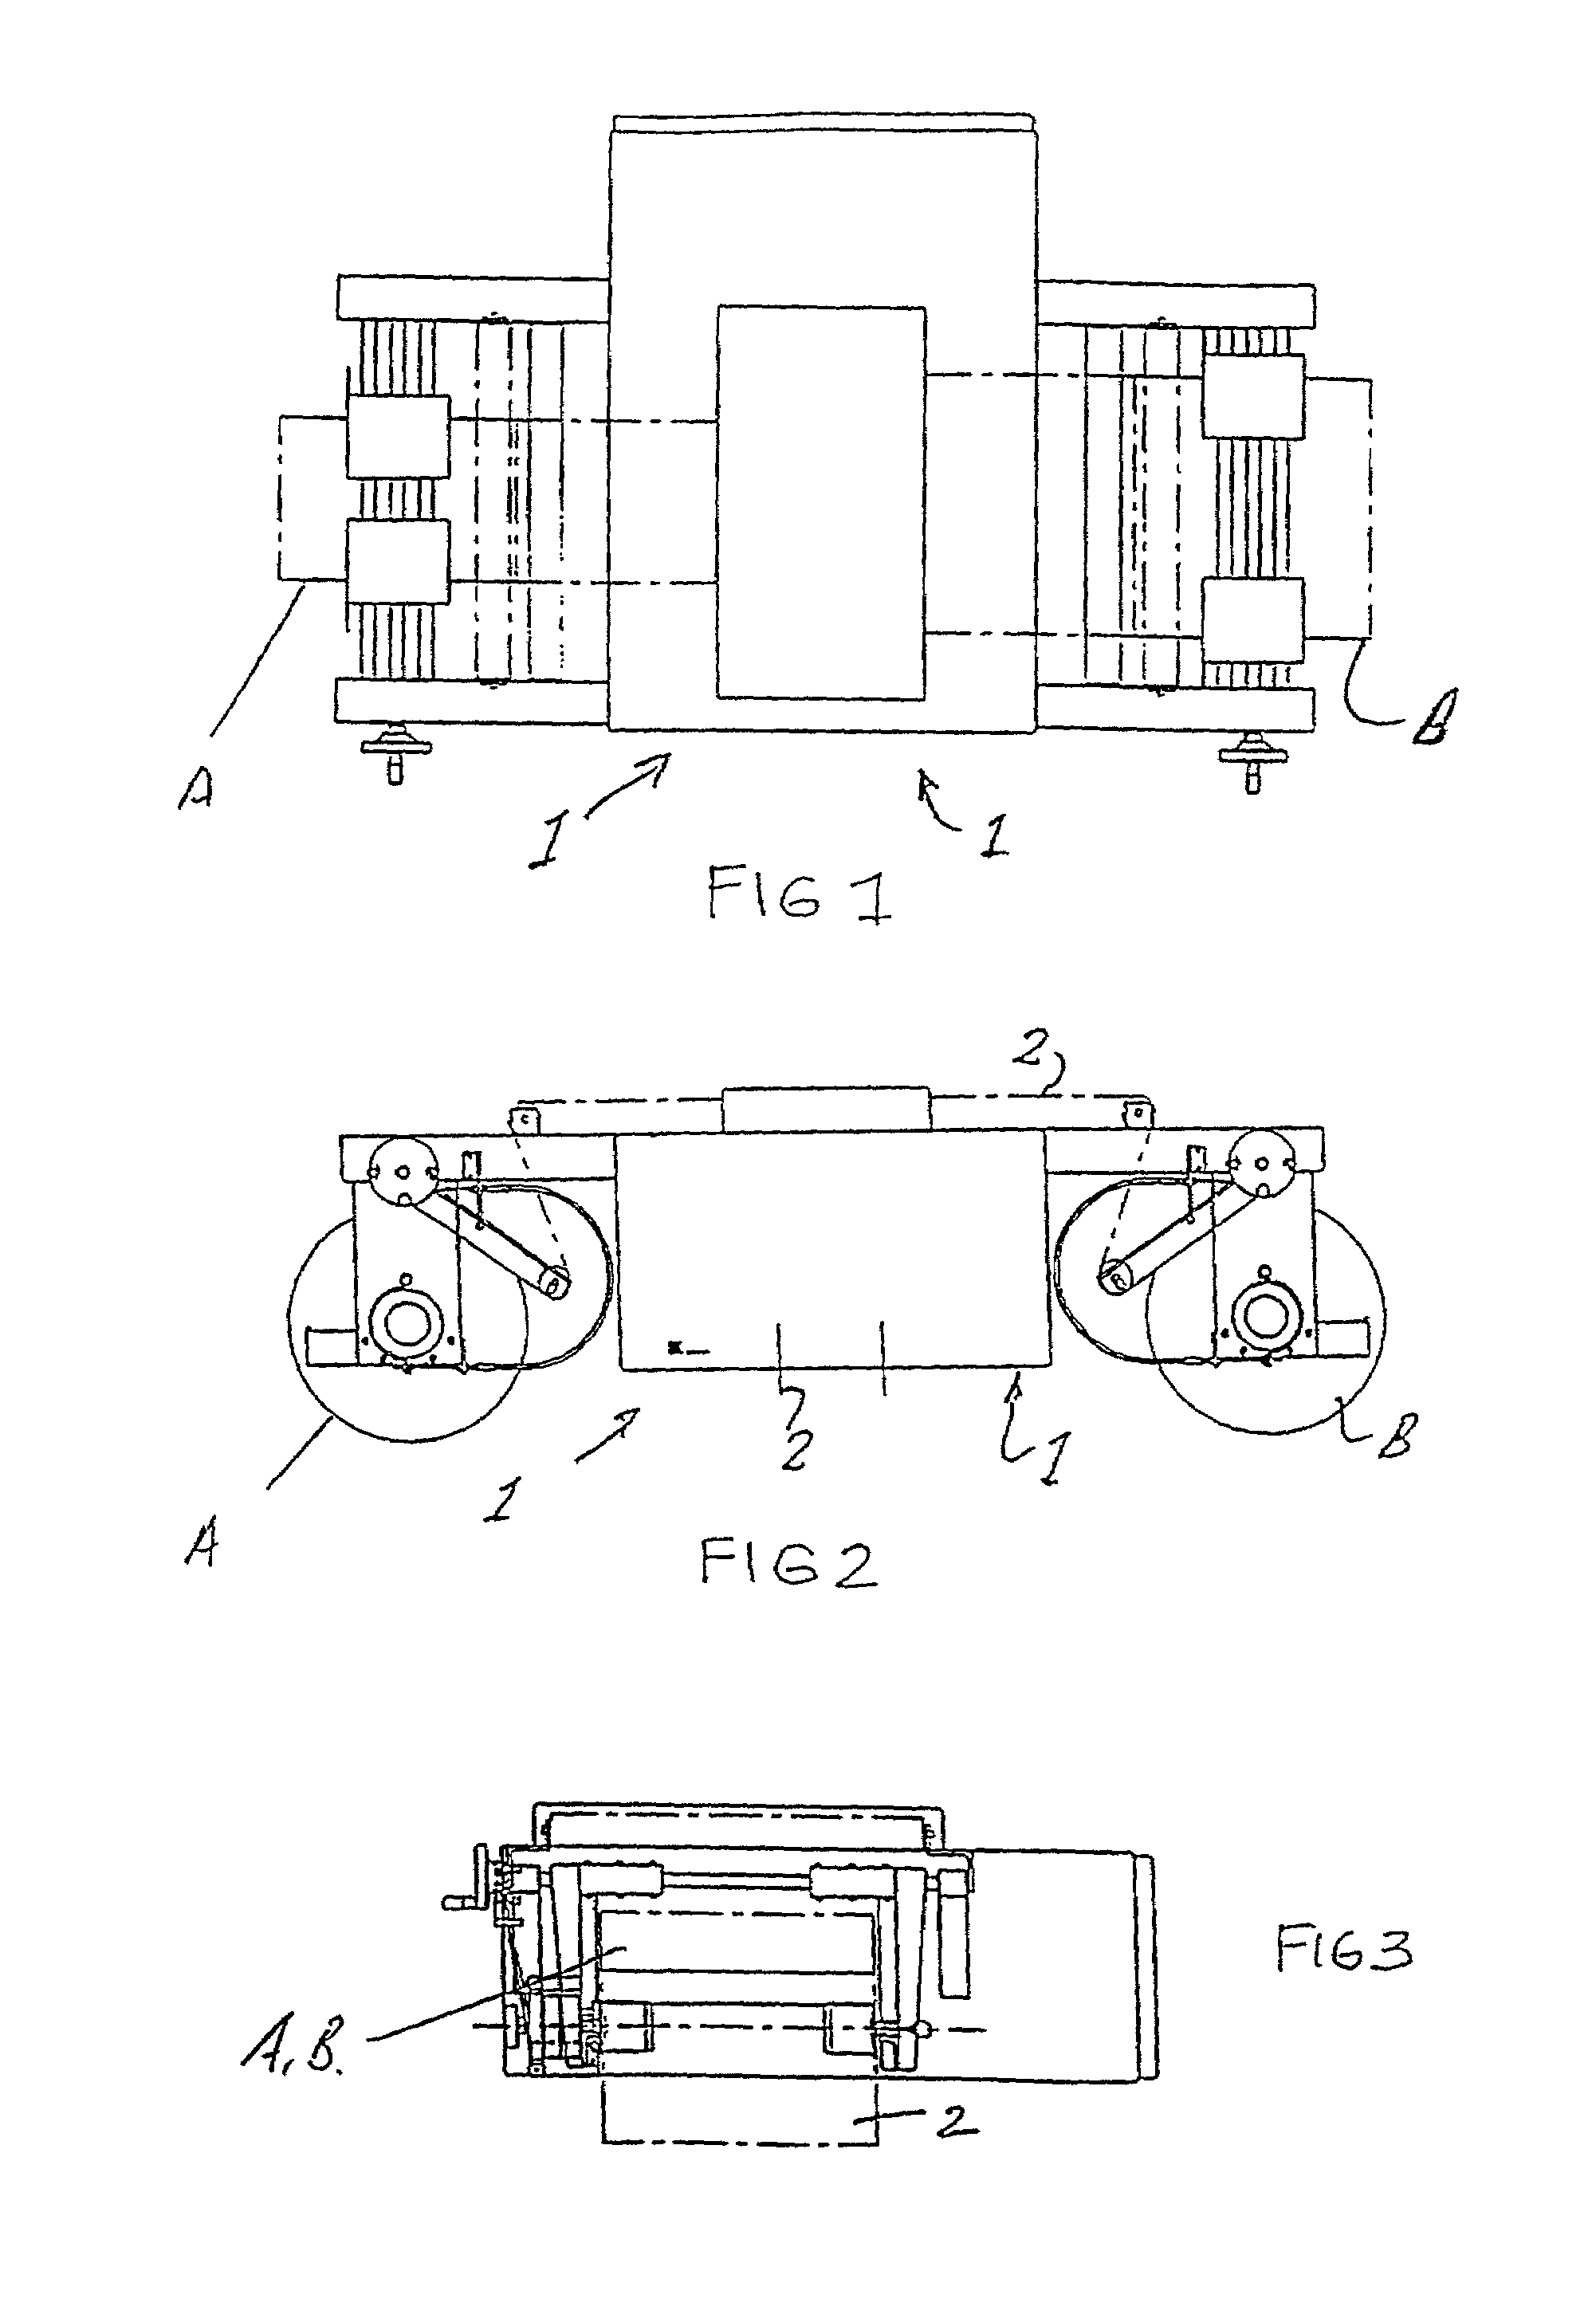 Apparatus and method for making bags of different dimensions